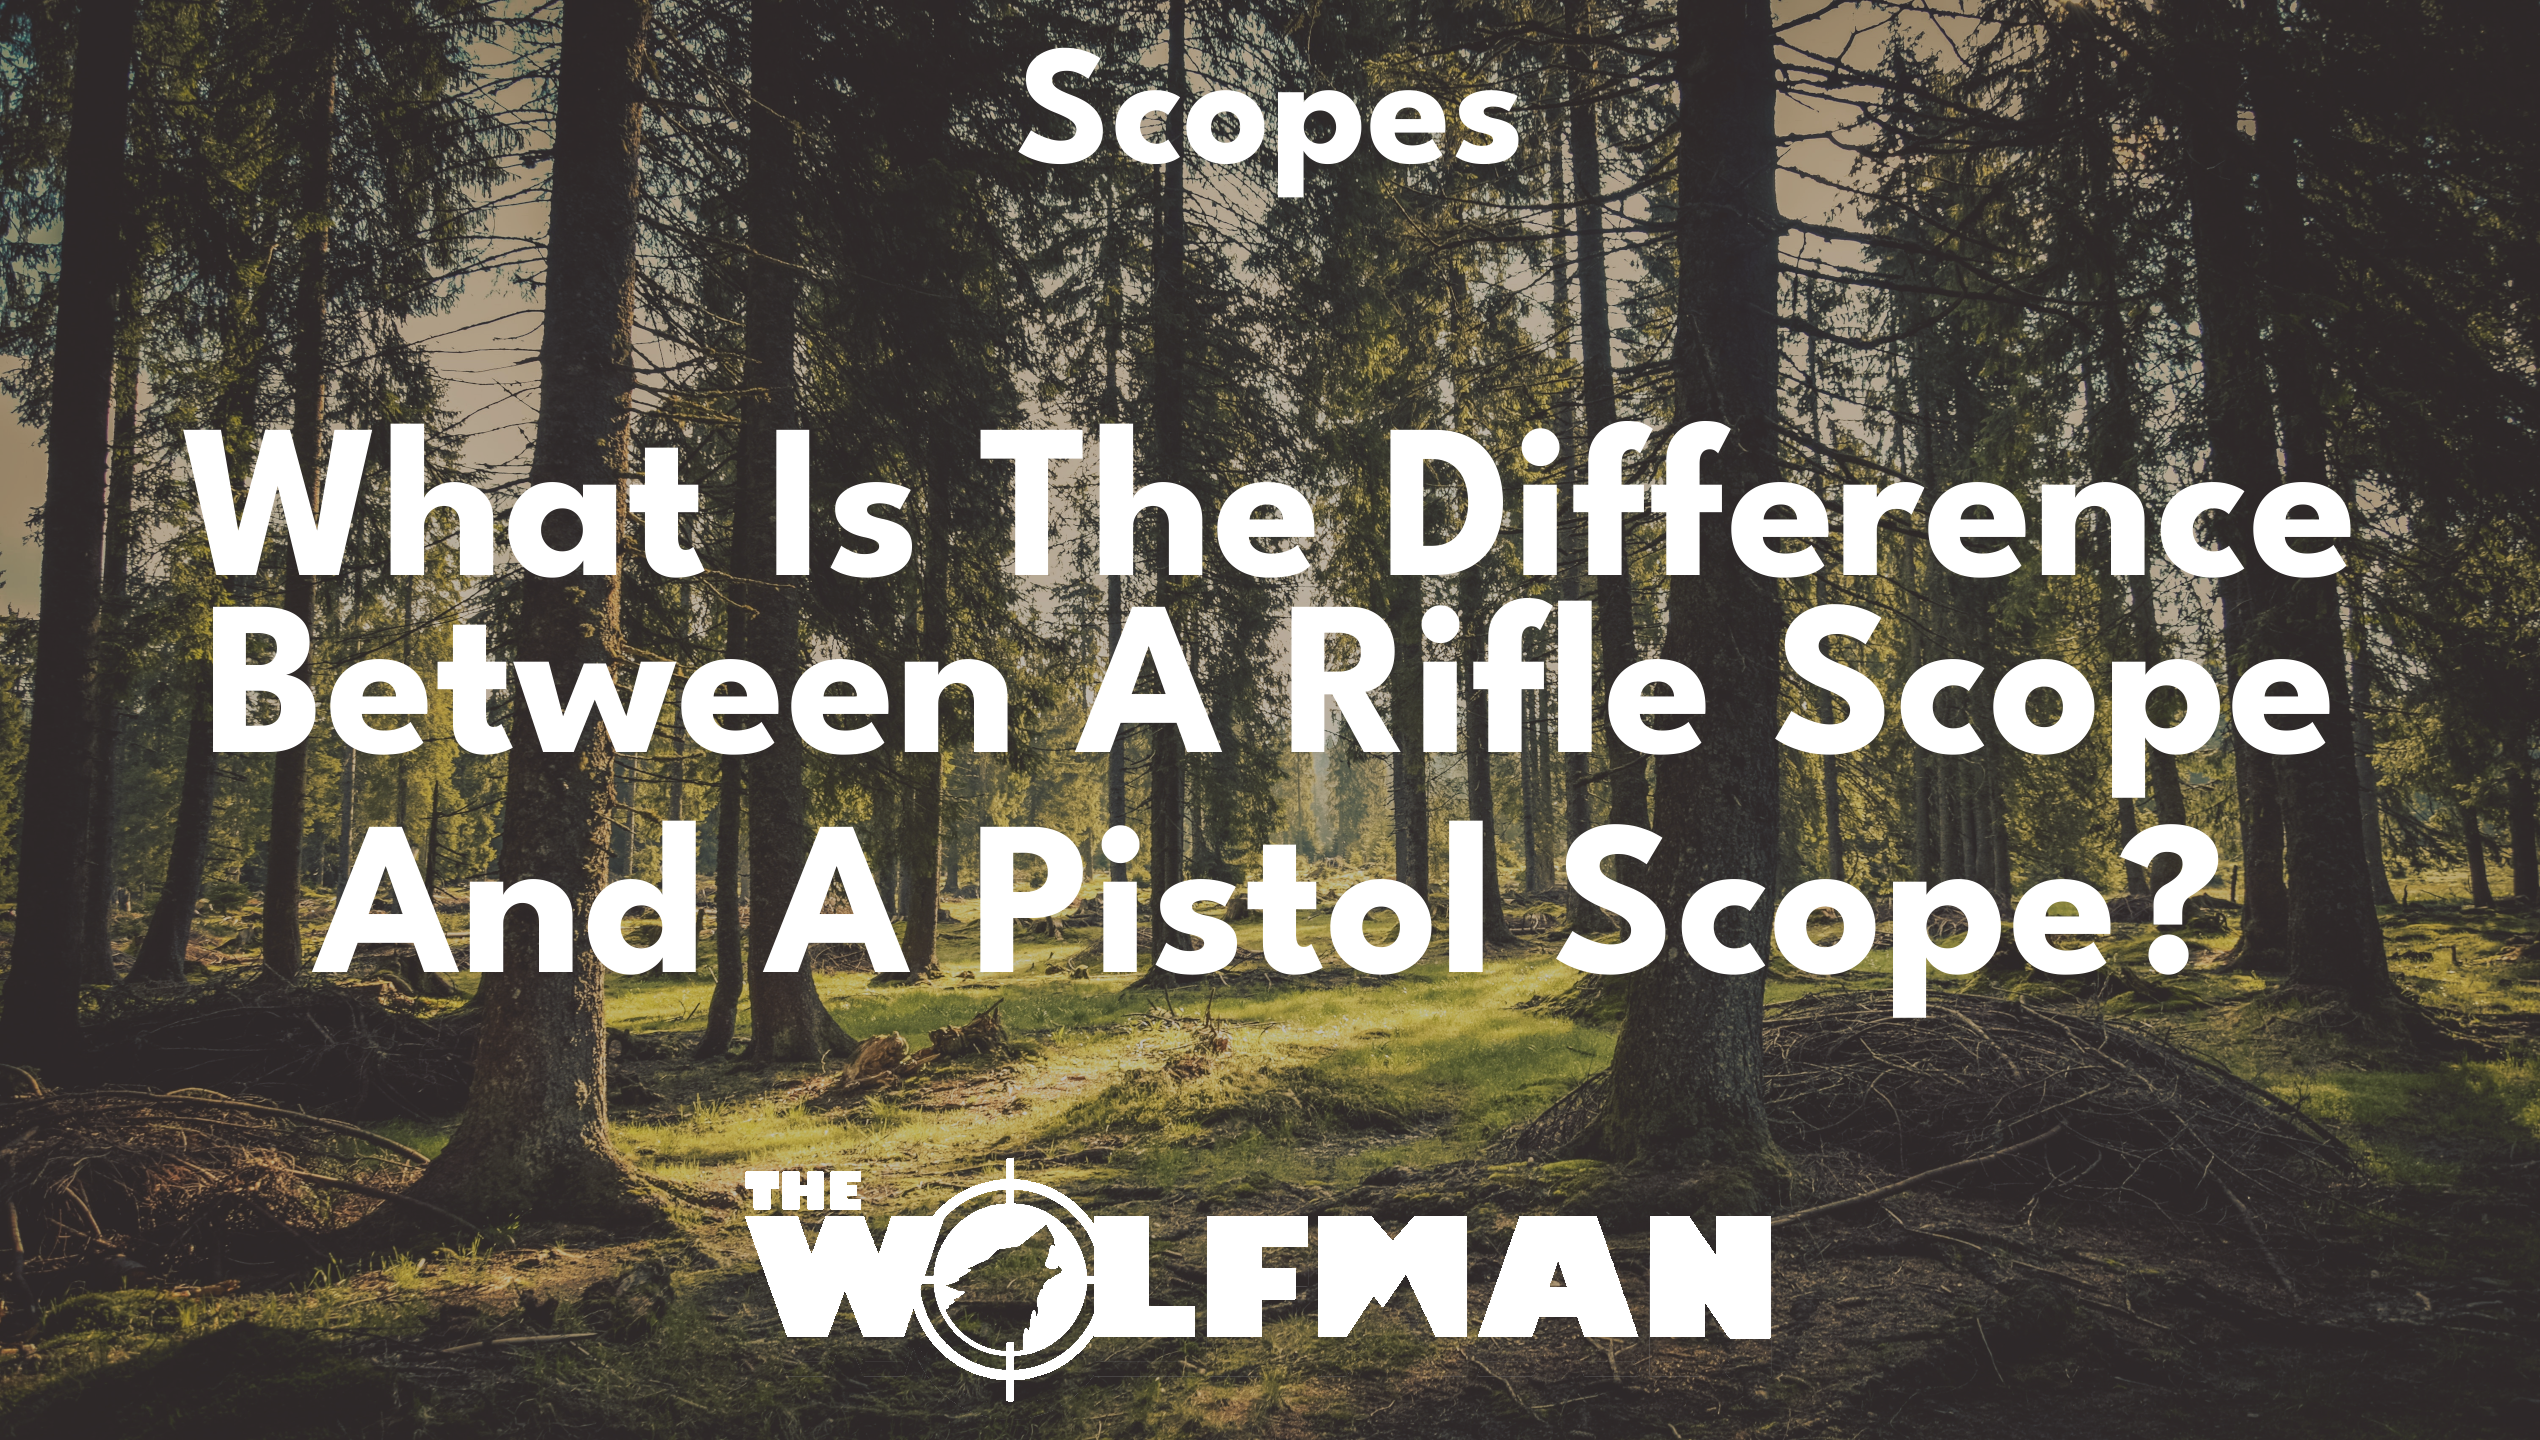 What Is The Difference Between A Rifle Scope And A Pistol Scope? — The Wolfman